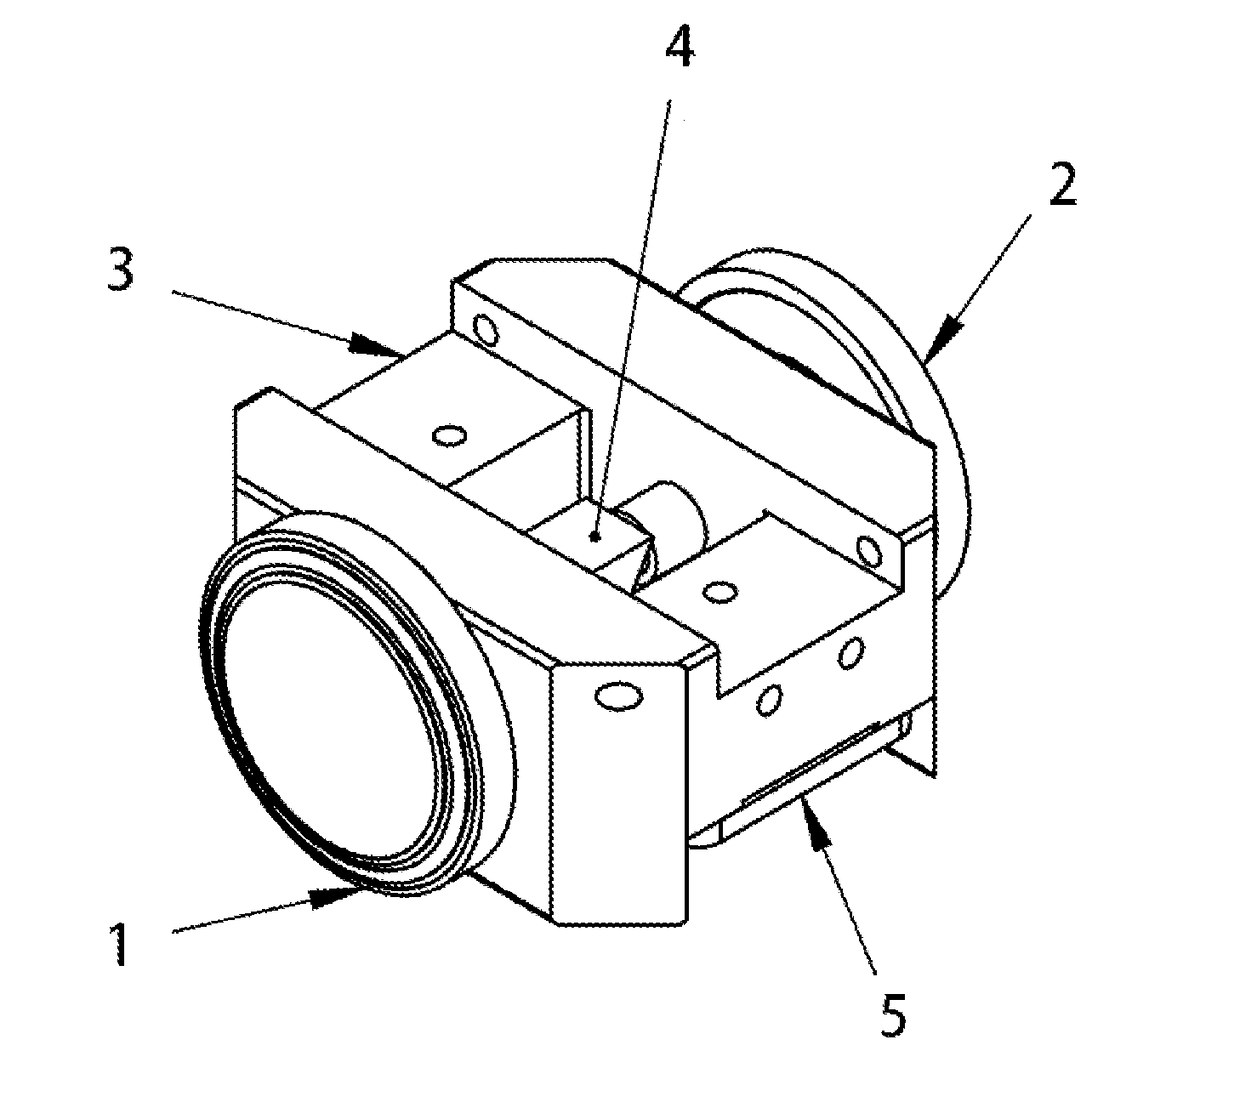 Panoramic image acquisition device